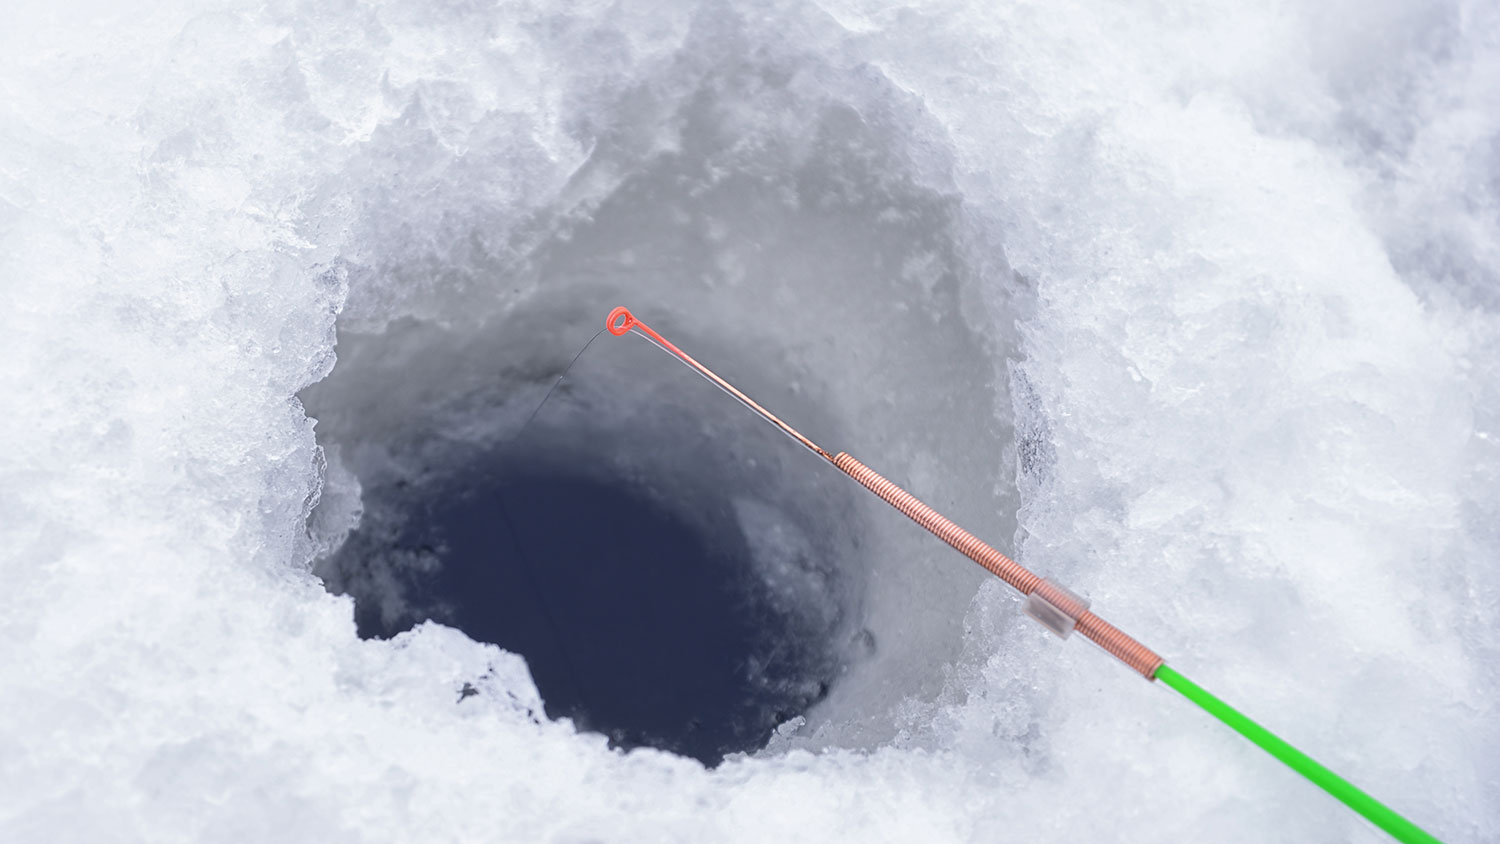 Ice fishing pole and line at ice hole